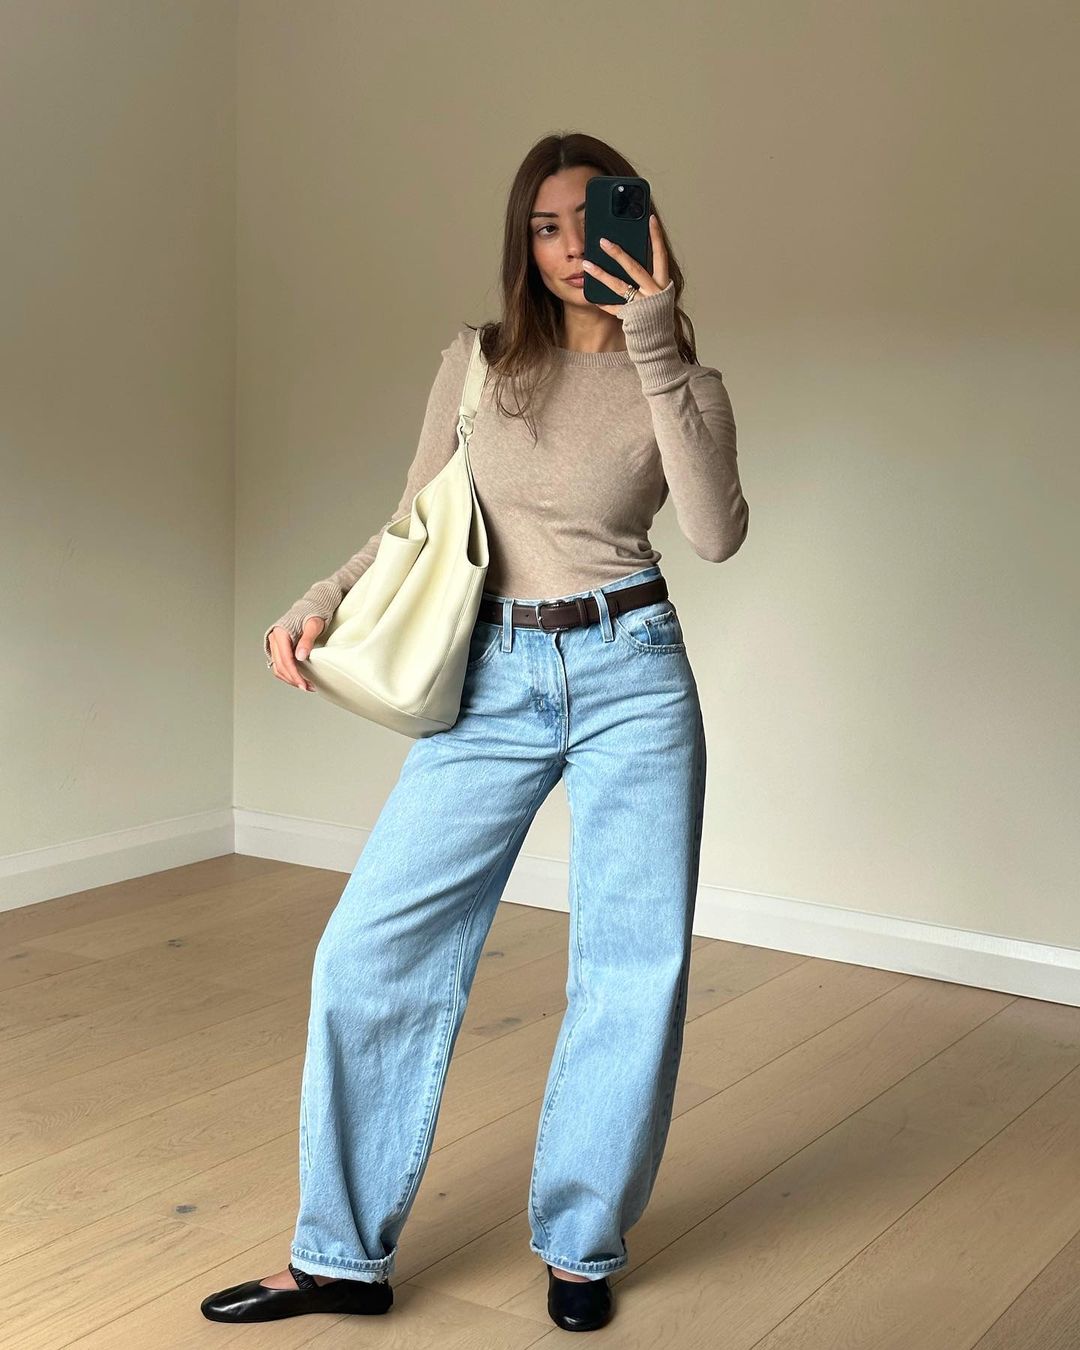 5 Baggy Jeans Outfits That Prove How Versatile This Trend Is | Who What ...